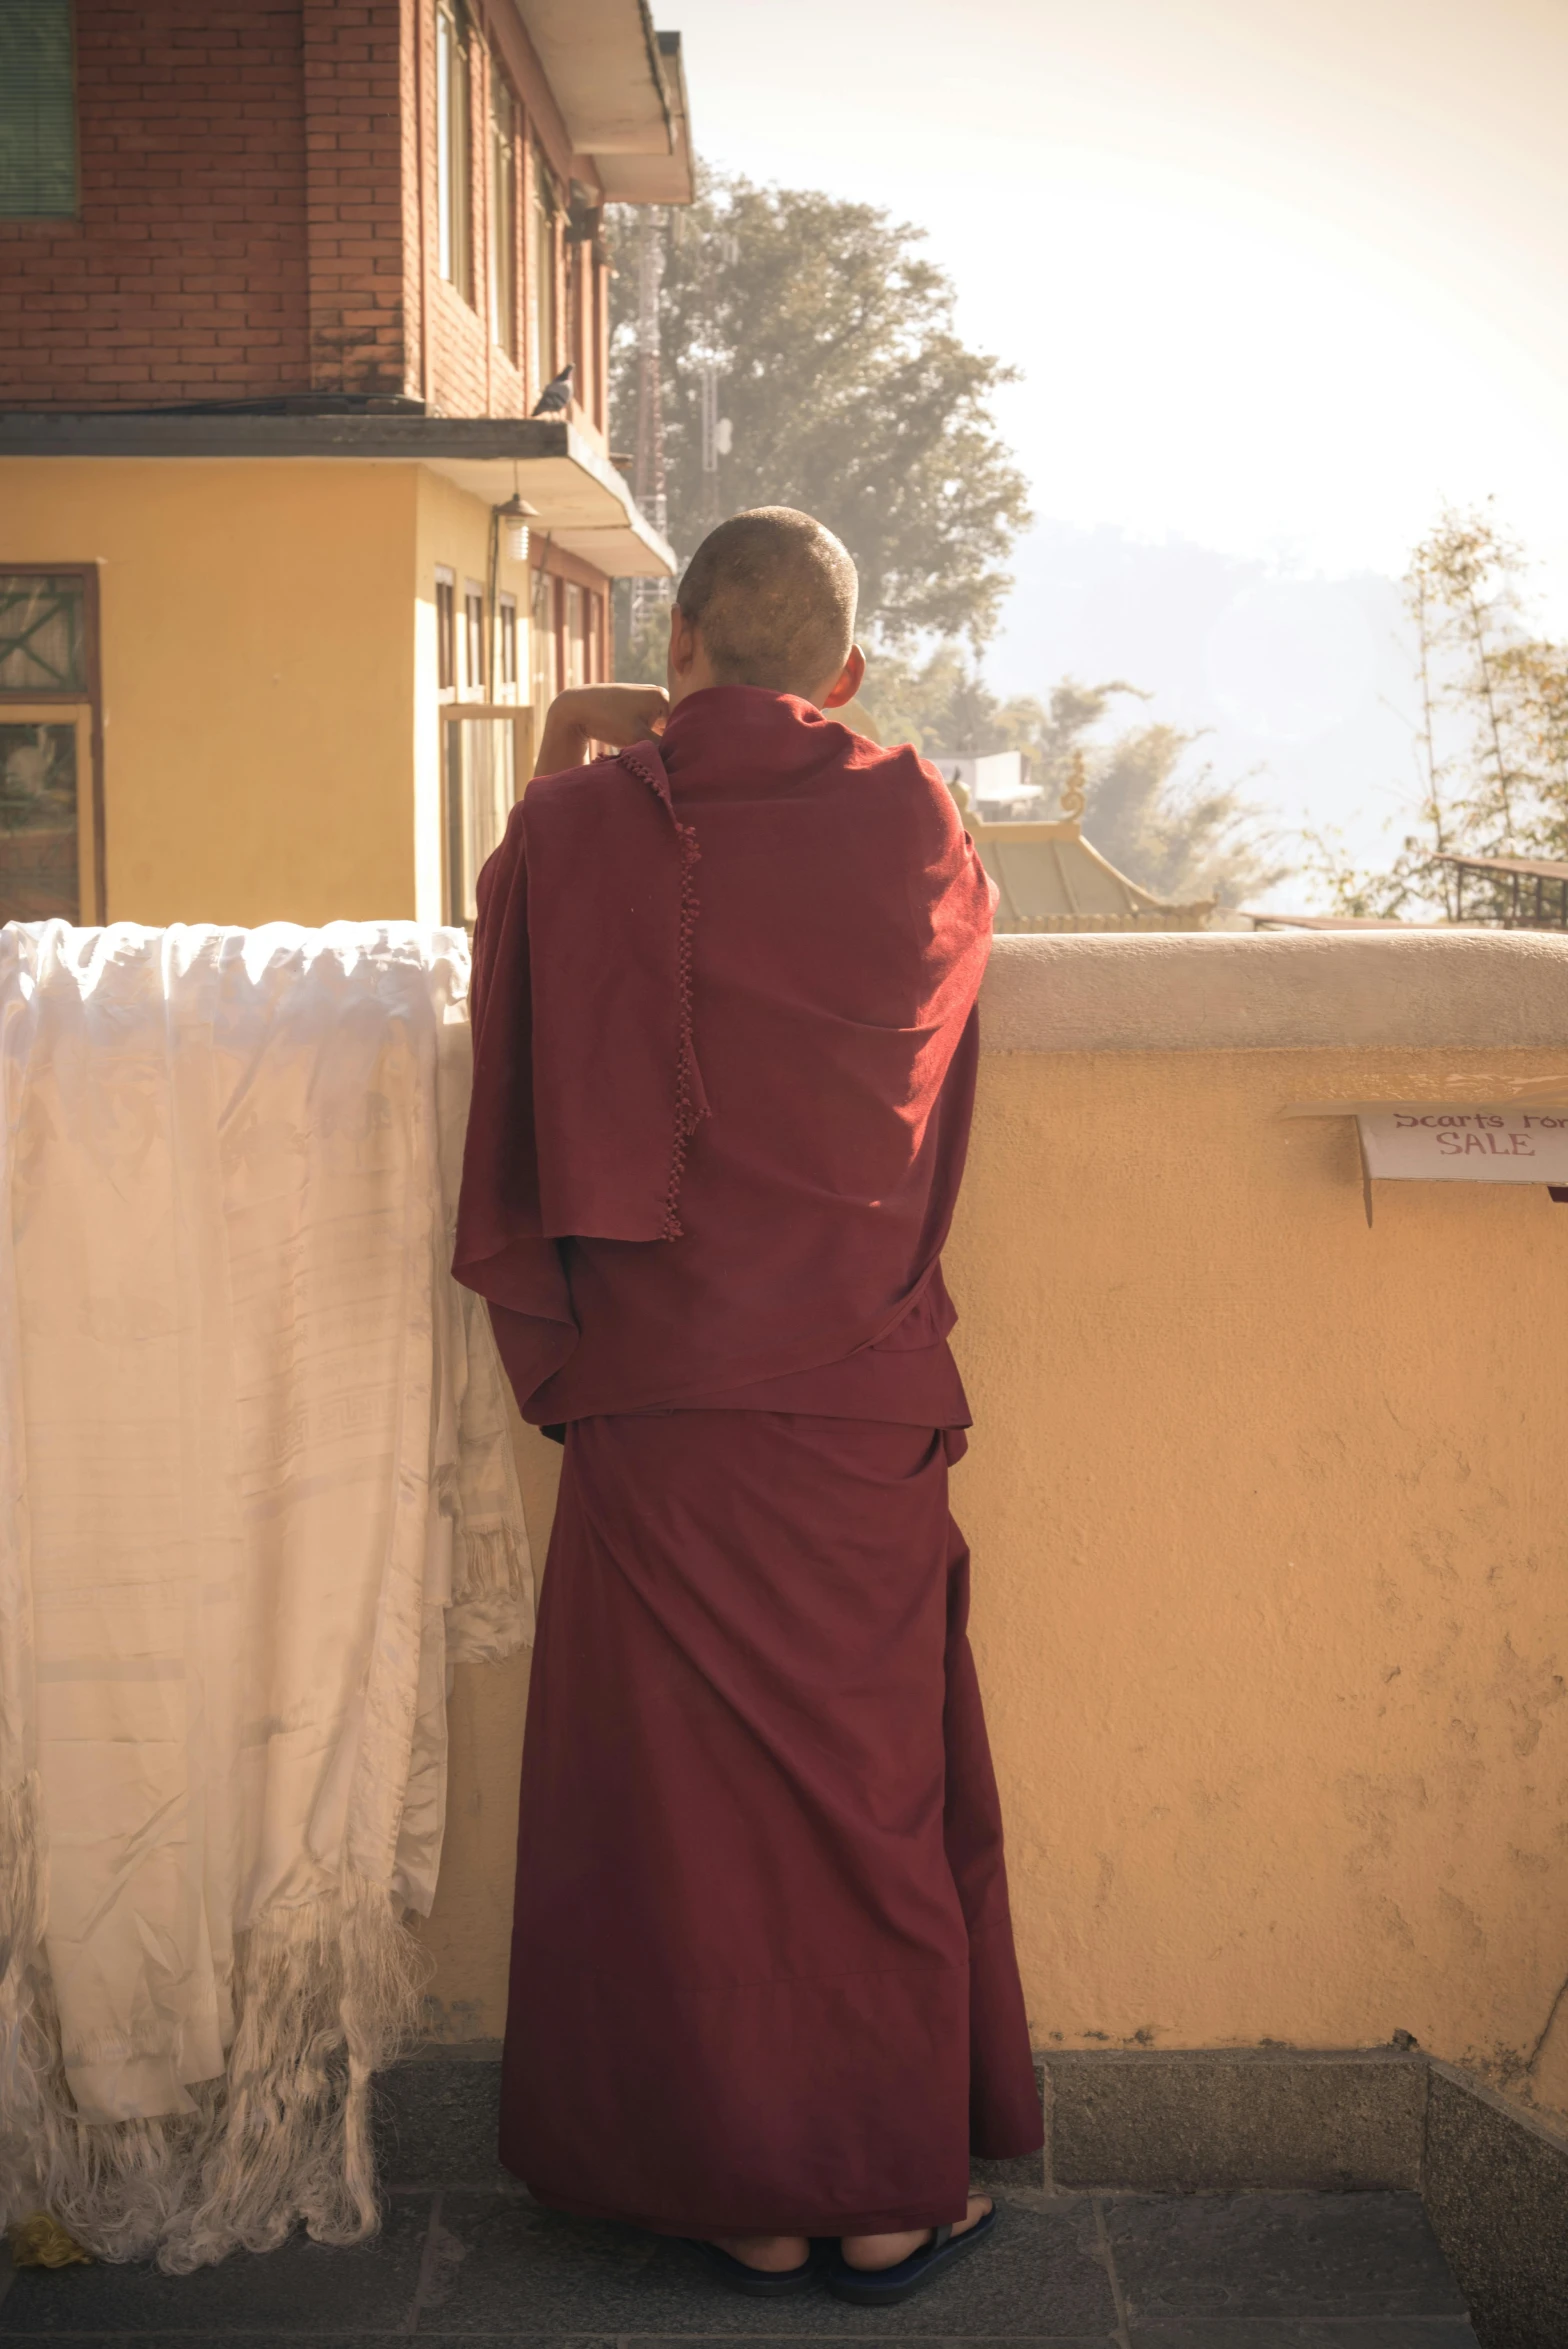 a man in a red robe leaning against a wall, inspired by Steve McCurry, trending on unsplash, bhutan, back view, sunny day, wearing jedi robes and a sari